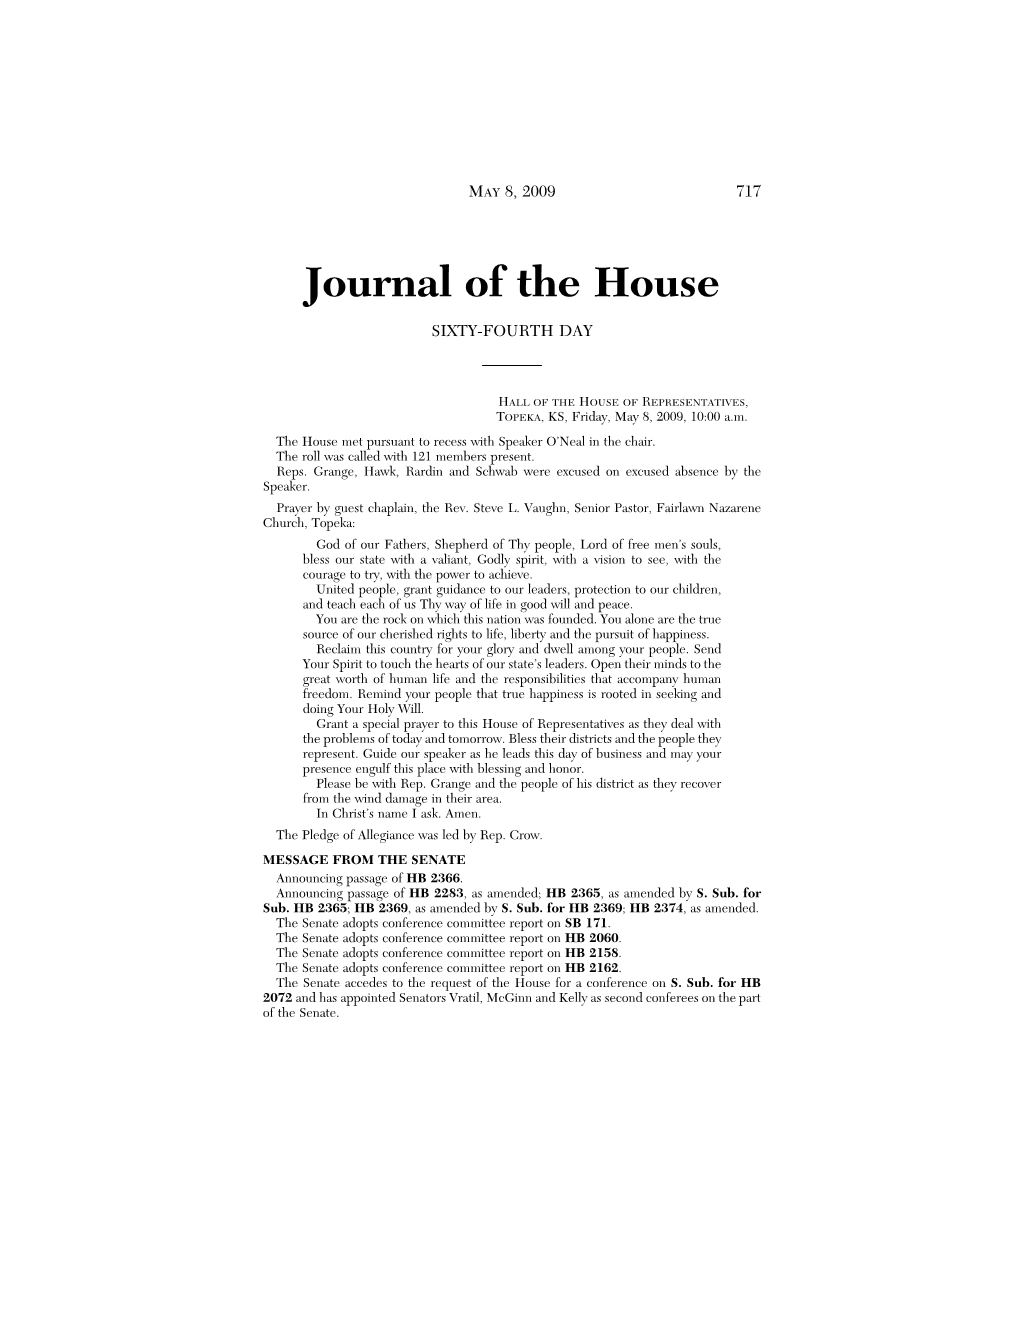 Journal of the House SIXTY-FOURTH DAY